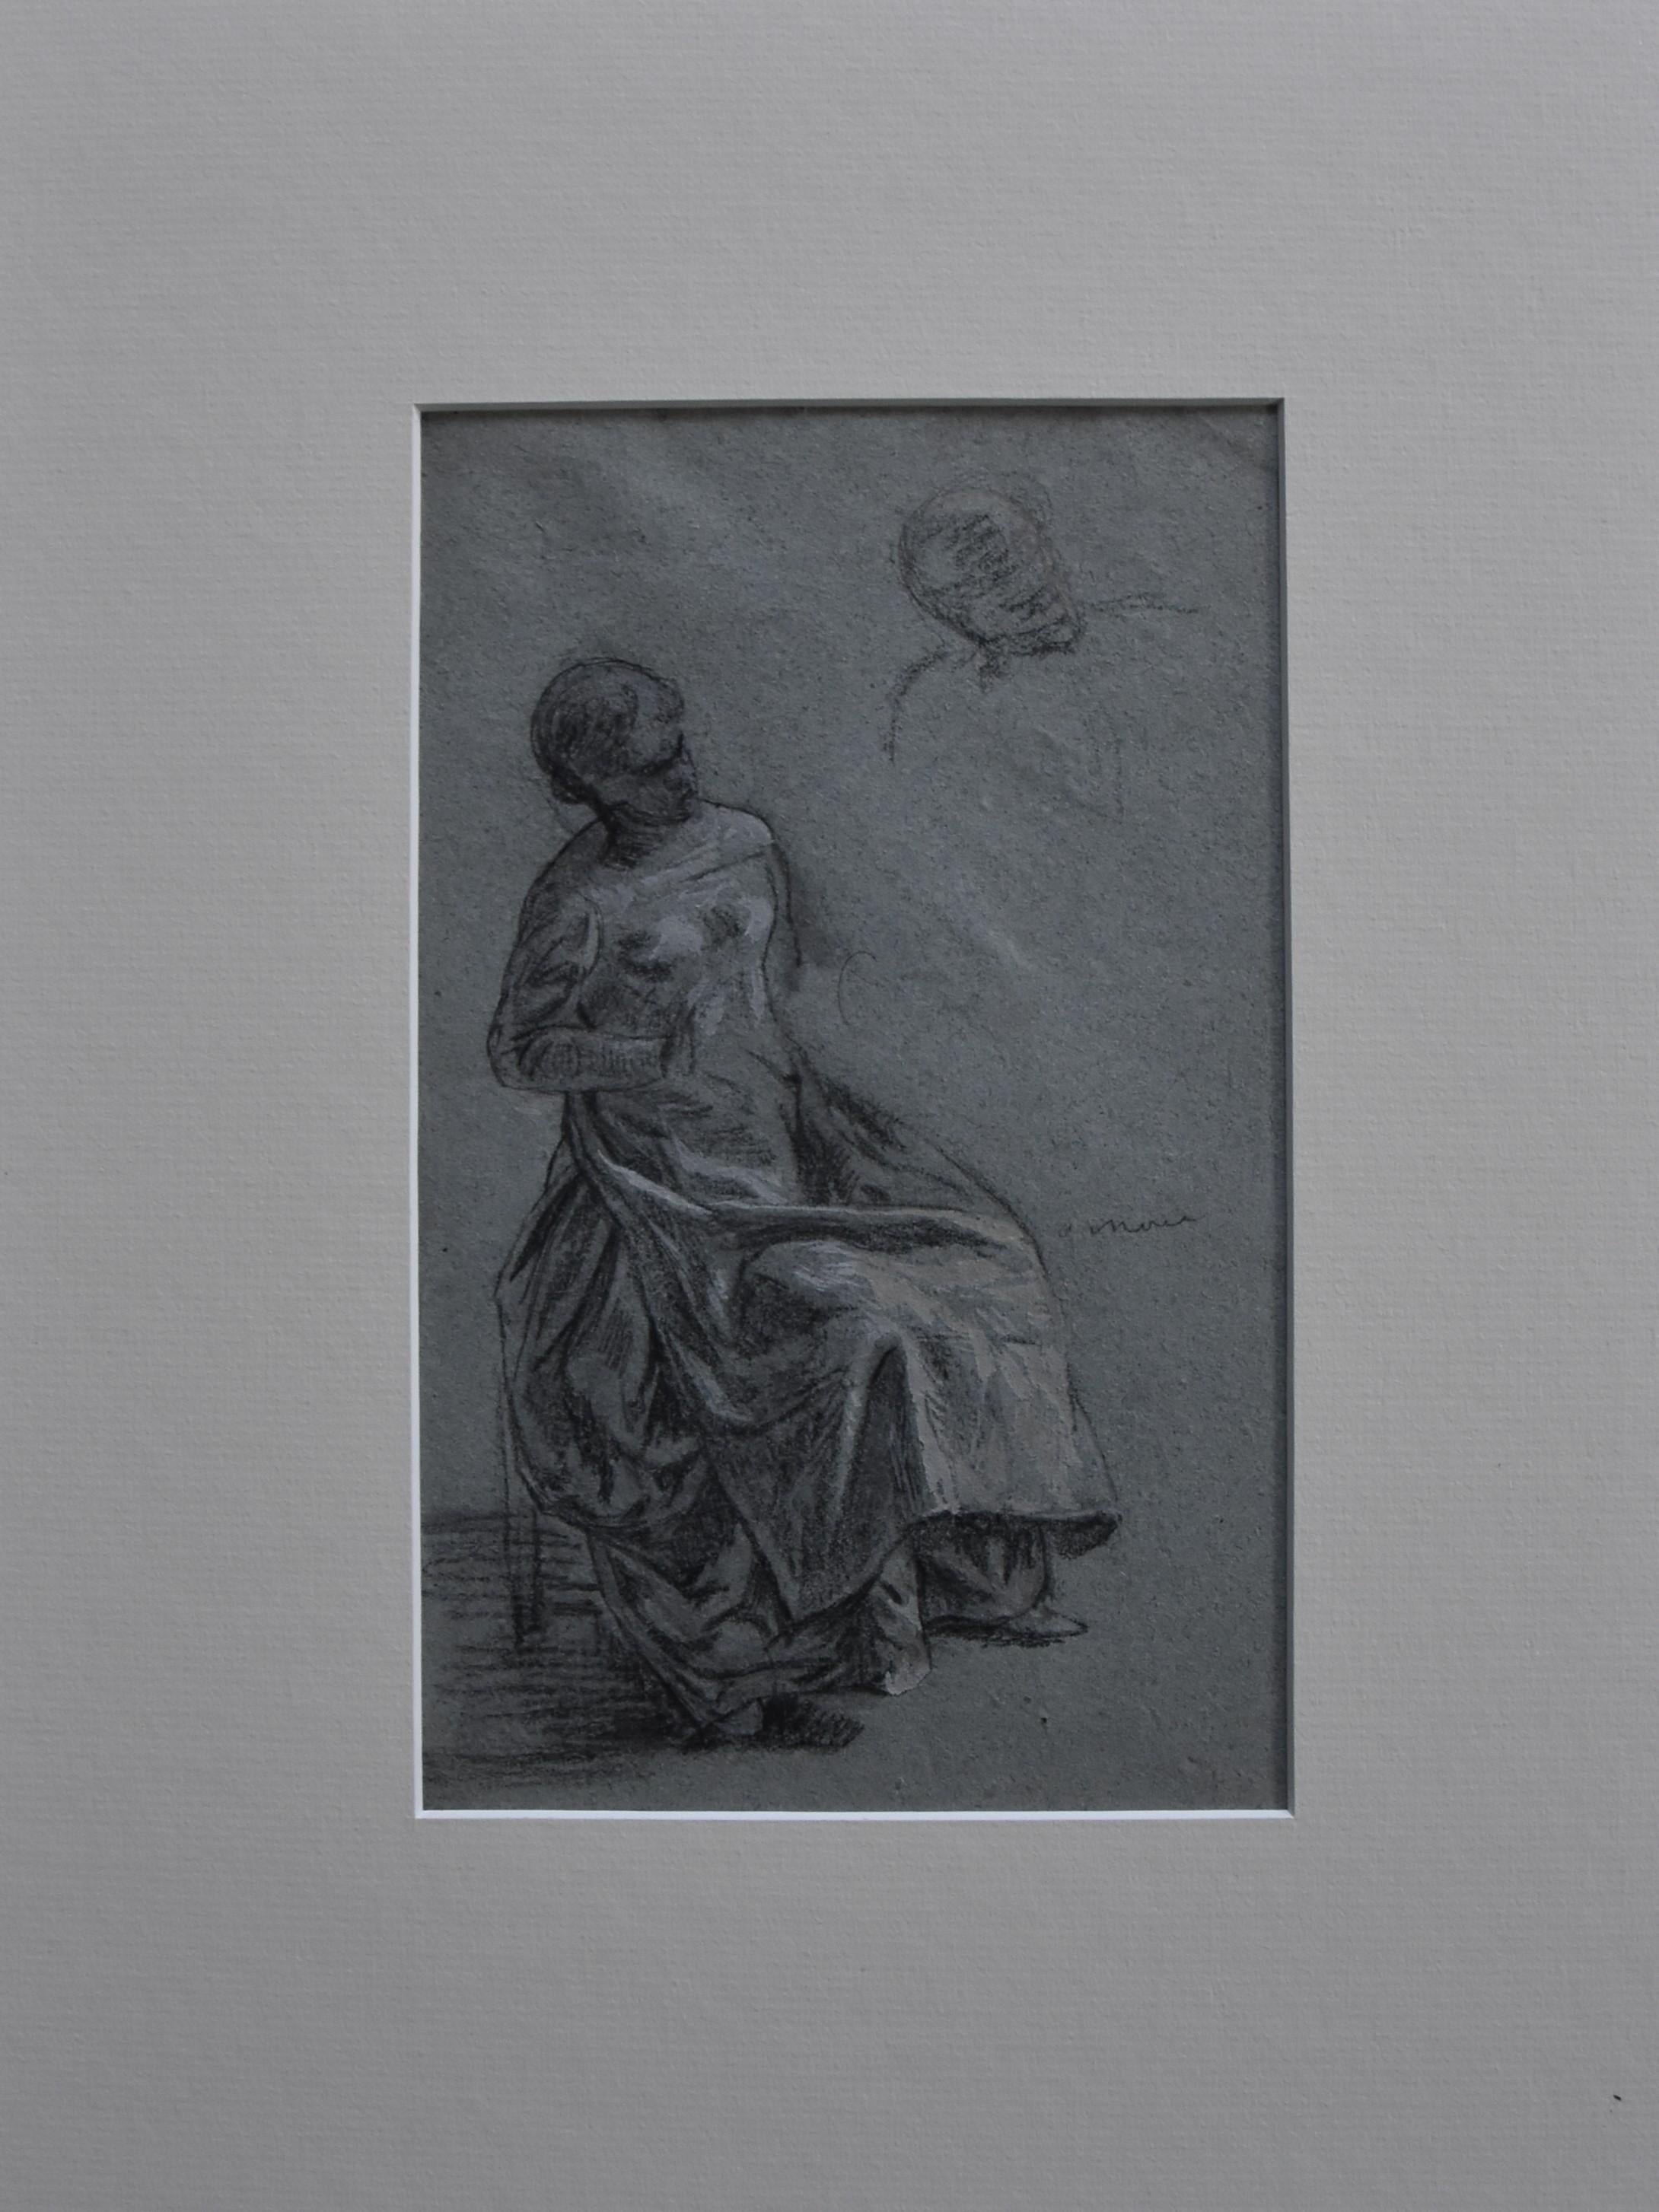 Attributed to Eugene Deully (1866-1933) 
A sitting woman, study, 
Pencil and heightenings of white gouache on blue grey paper;
23 x 14.5 cm
Framed (damages to the frame)  : 41.5 x 32.5 cm

The attribution to Eugene Deully is indicated on the verso